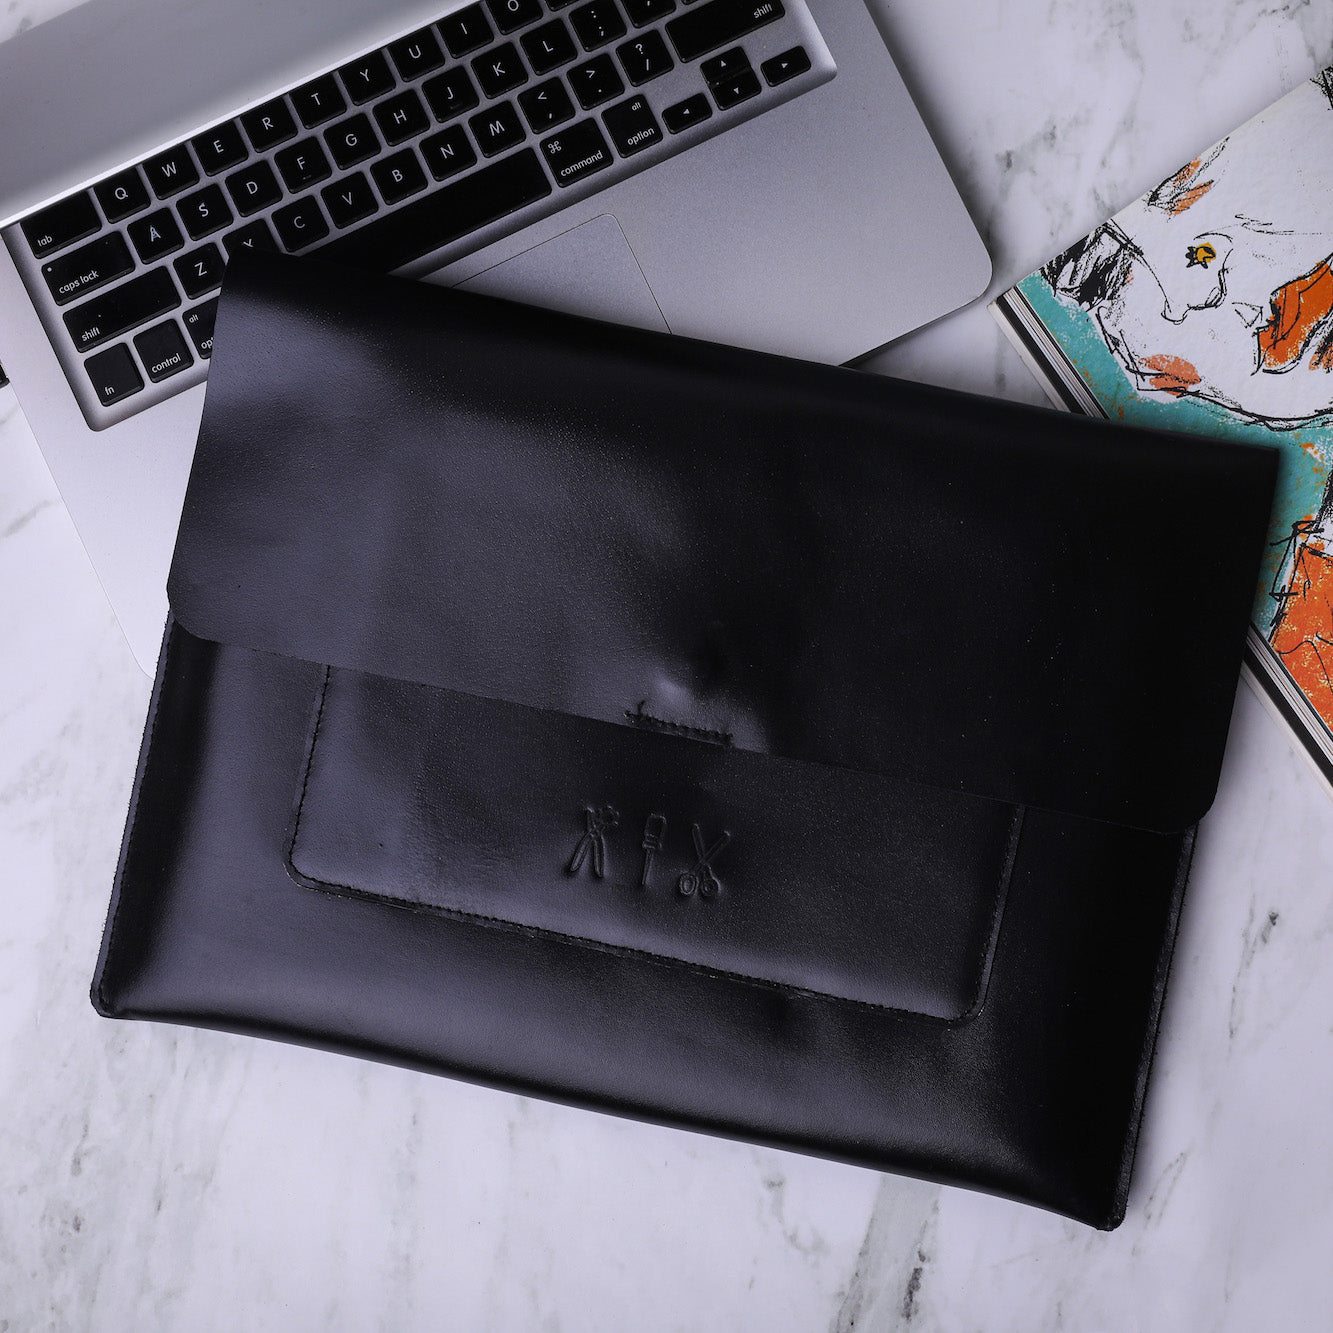 HANDCRAFTED LEATHER LAPTOP SLEEVE COVER